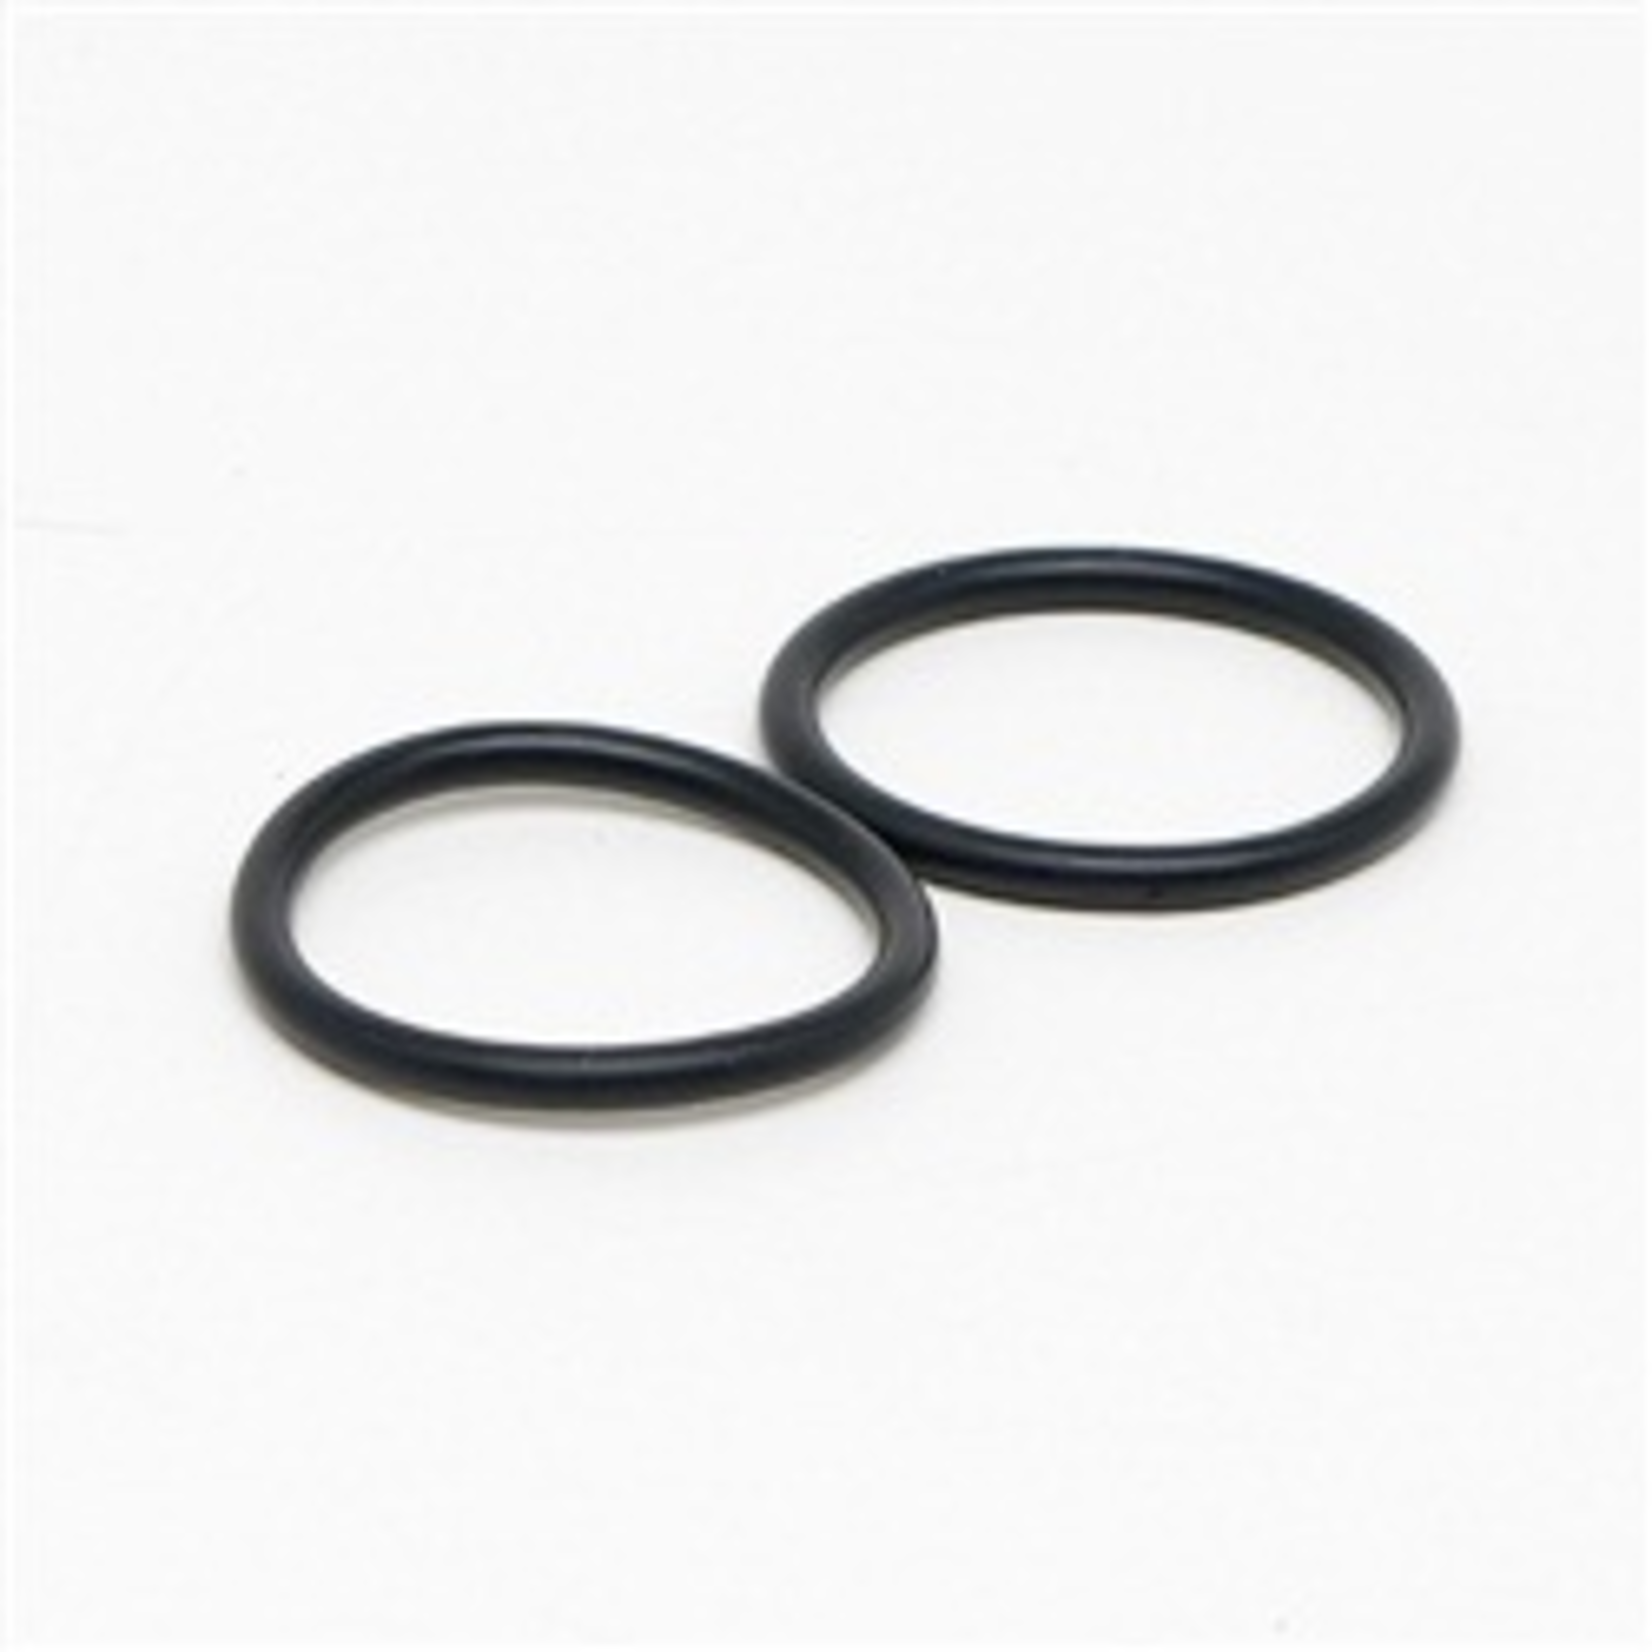 FLUVAL (W) FX5/6 Top Cover Click-fit O -Ring